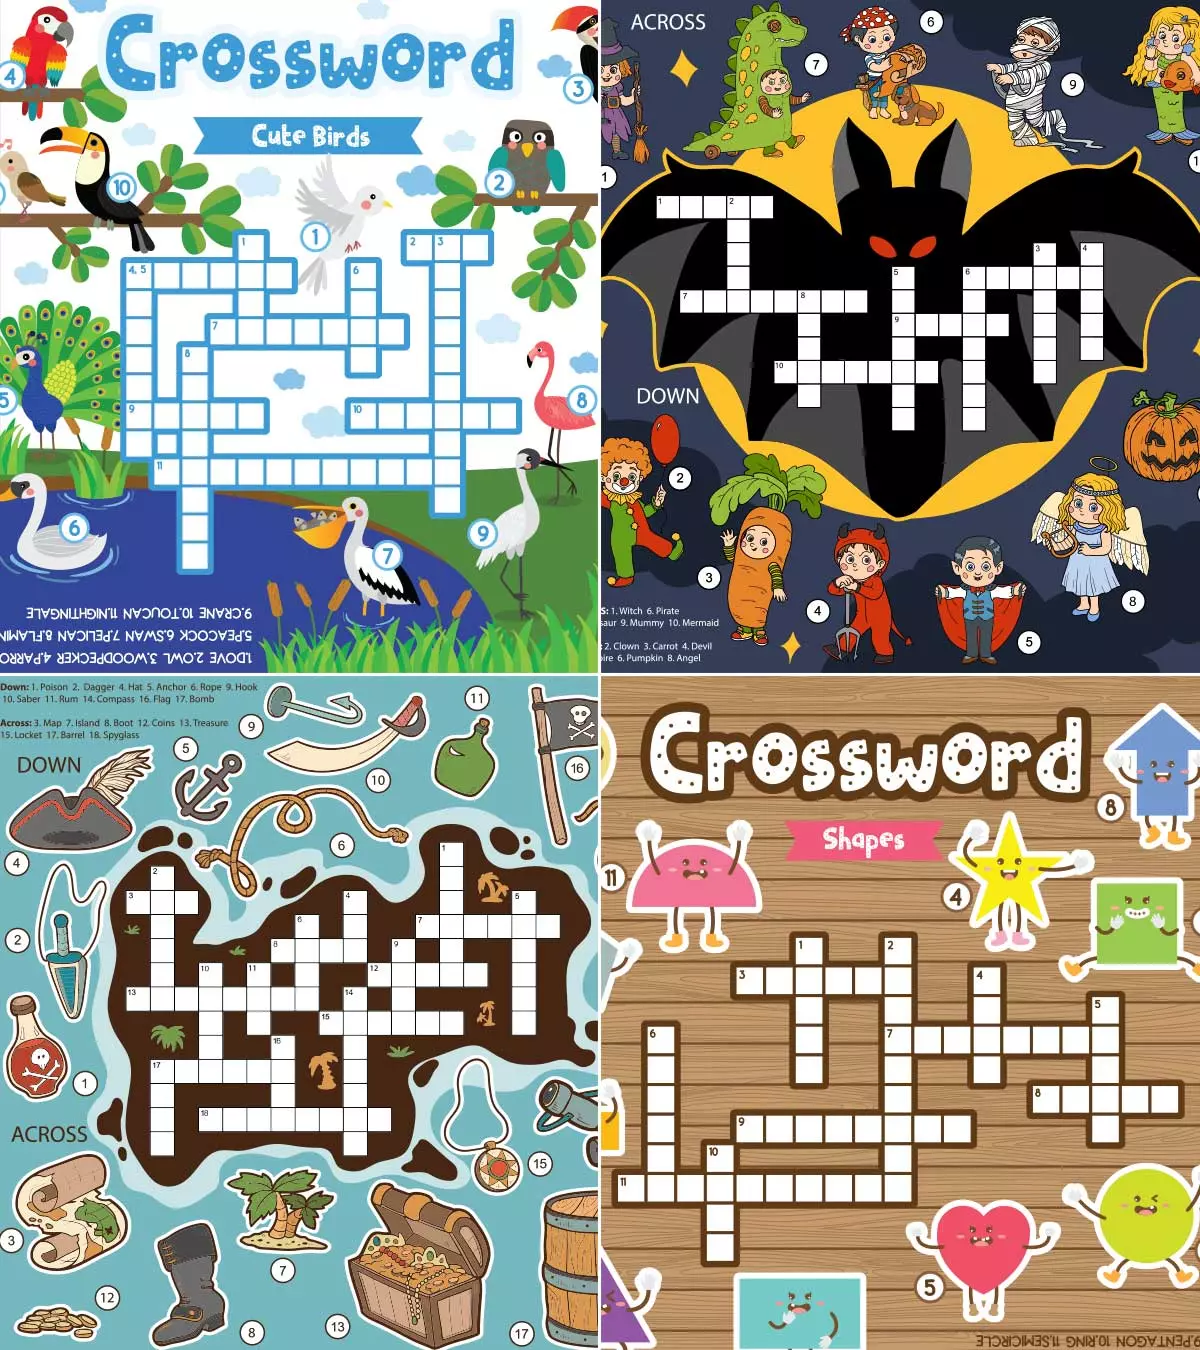 20 Learners Crossword Puzzles For Kids